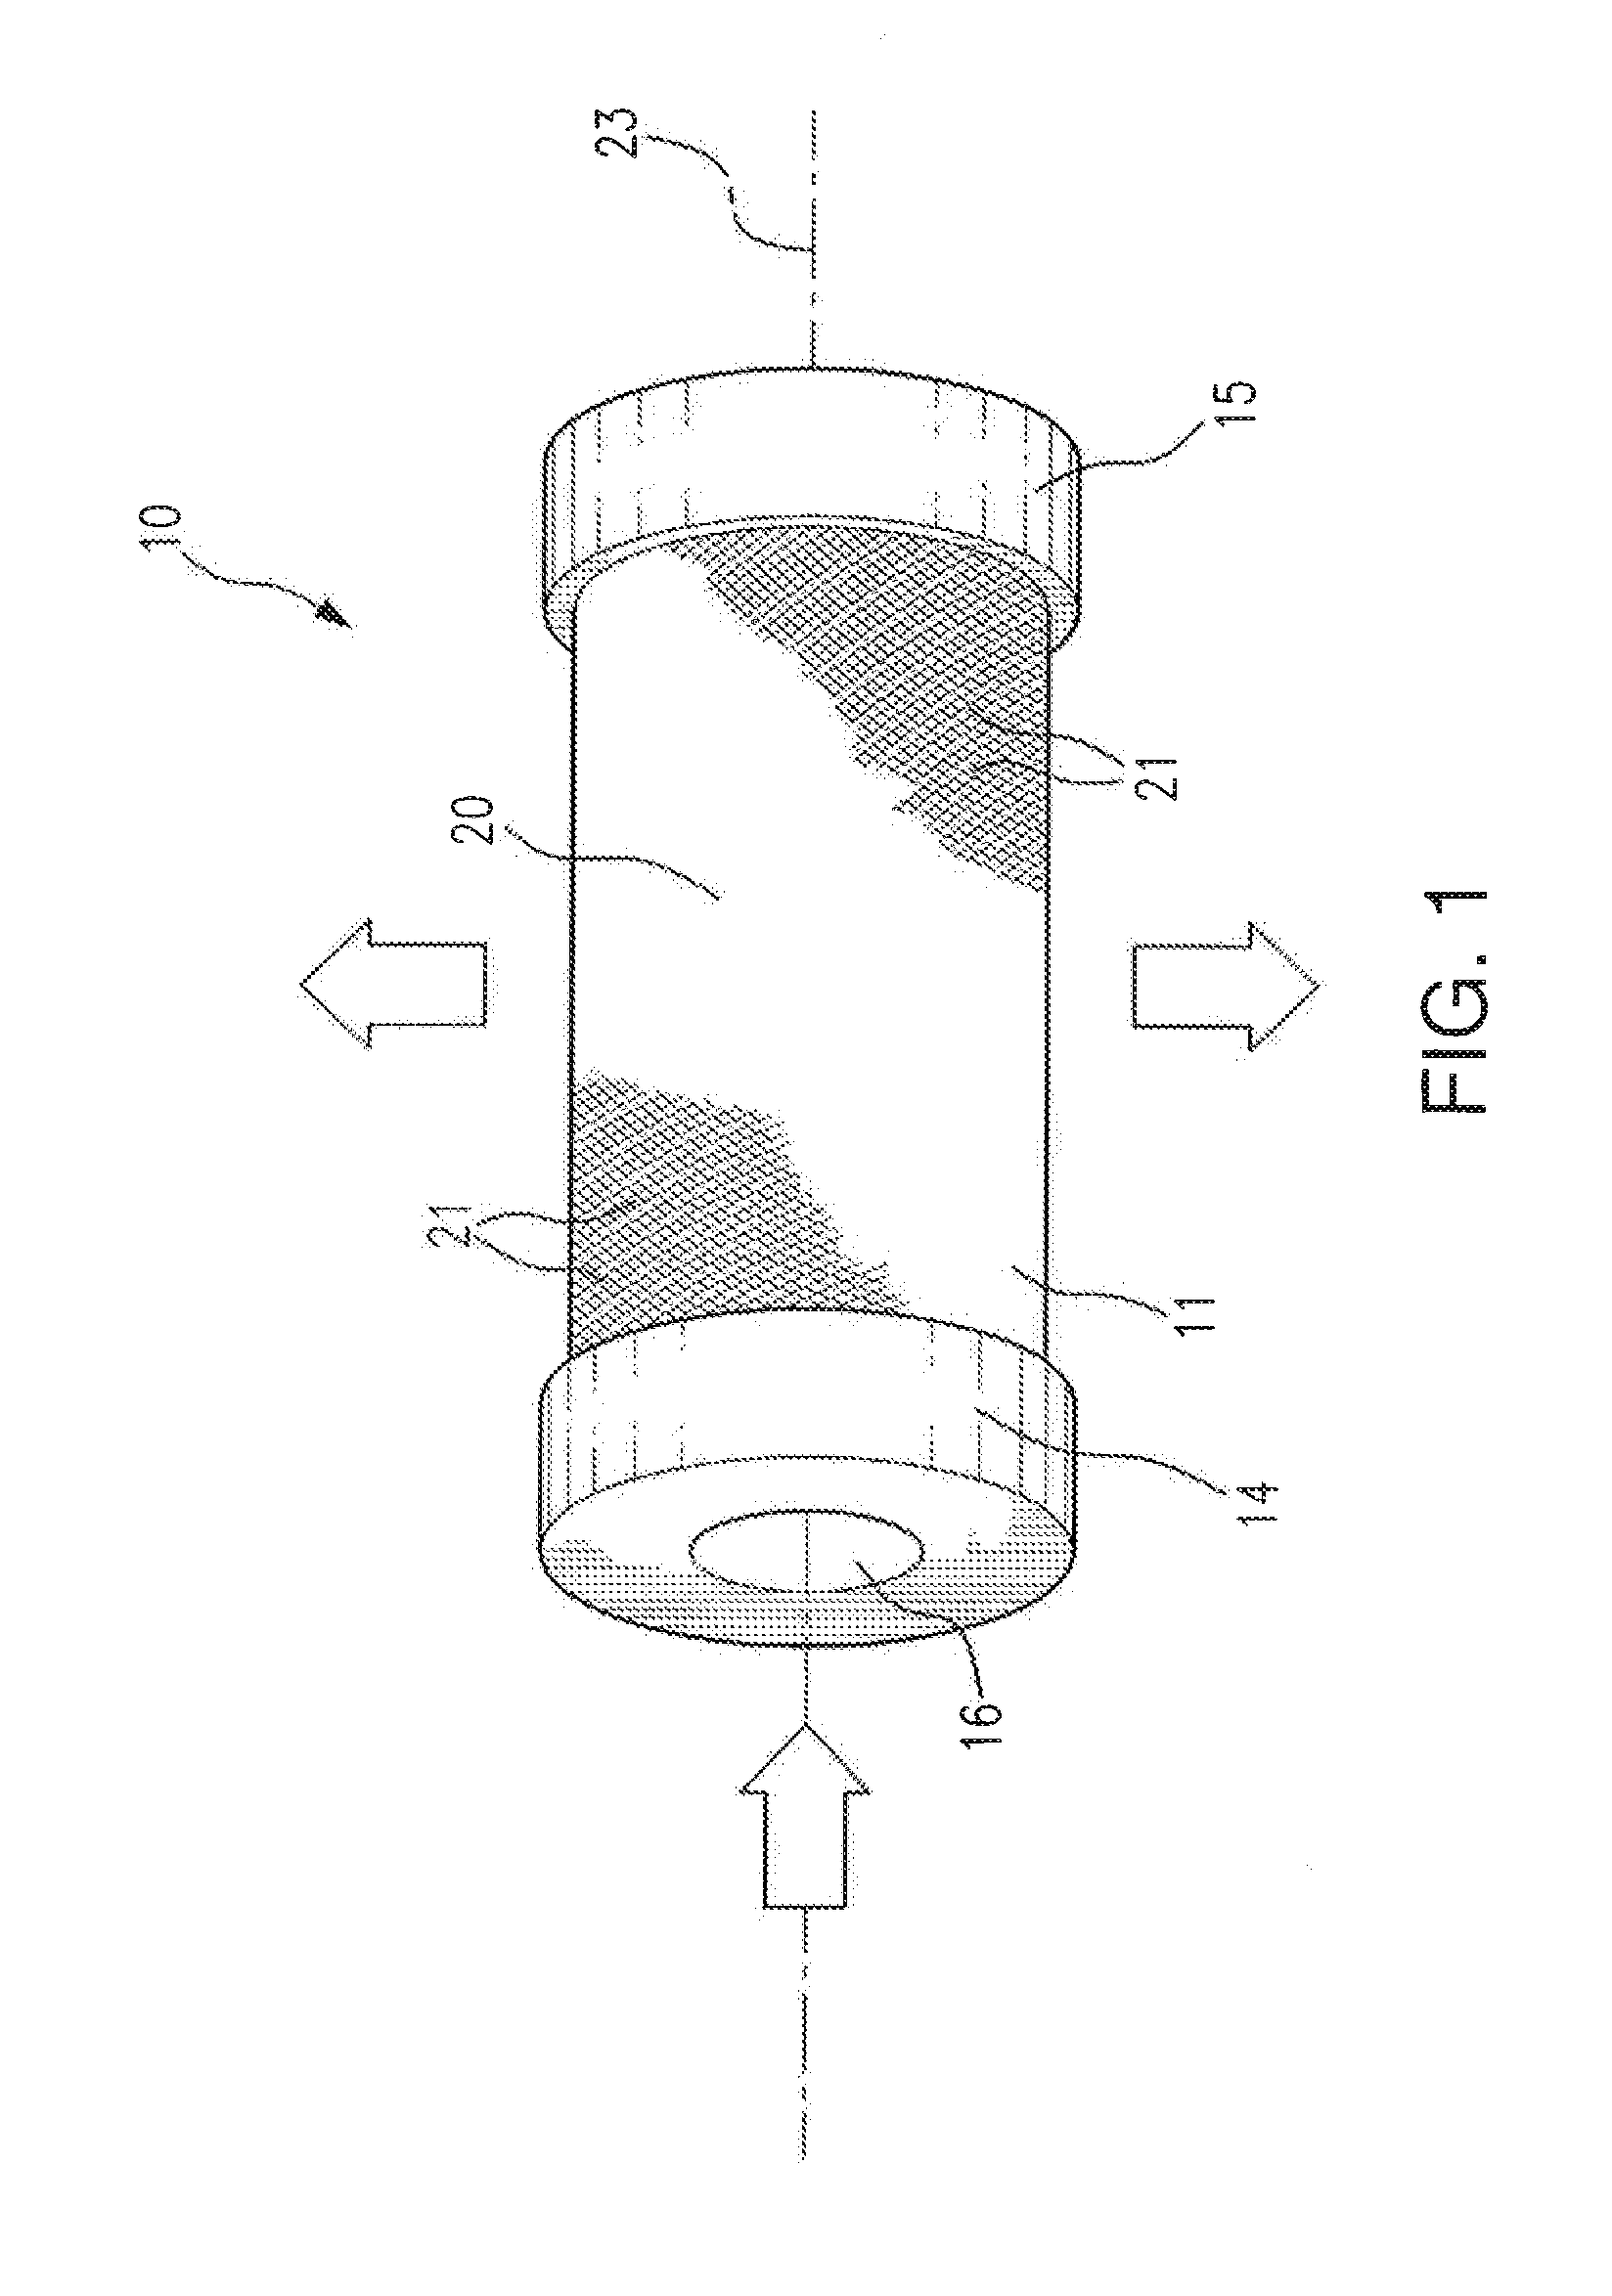 Coalescers and methods for separating liquids in an immiscible mixture